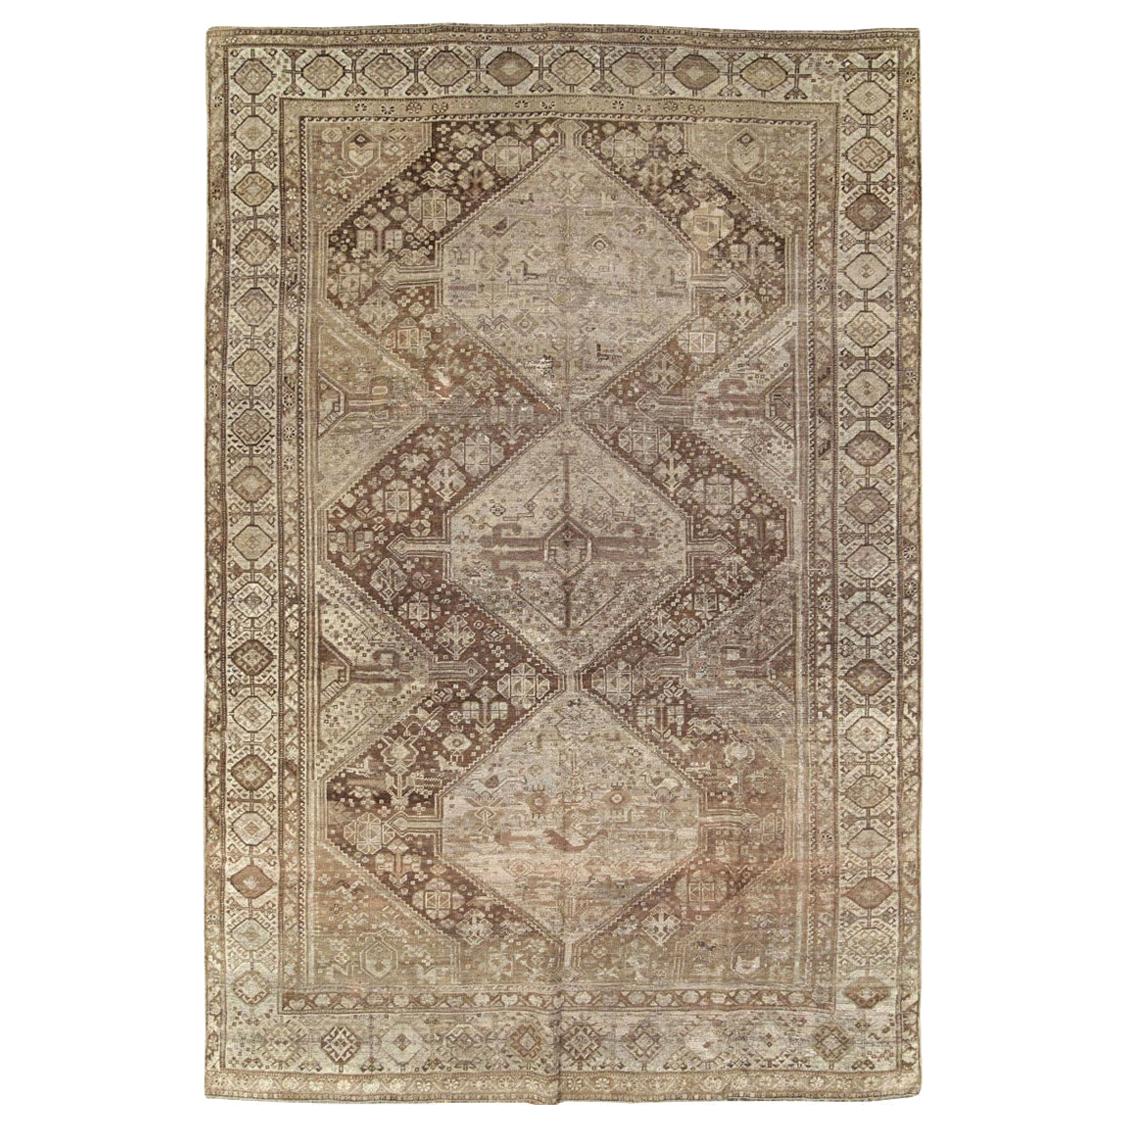 Tribal Mid-20th Century Handmade Persian Shiraz Accent Rug in Cream and Brown